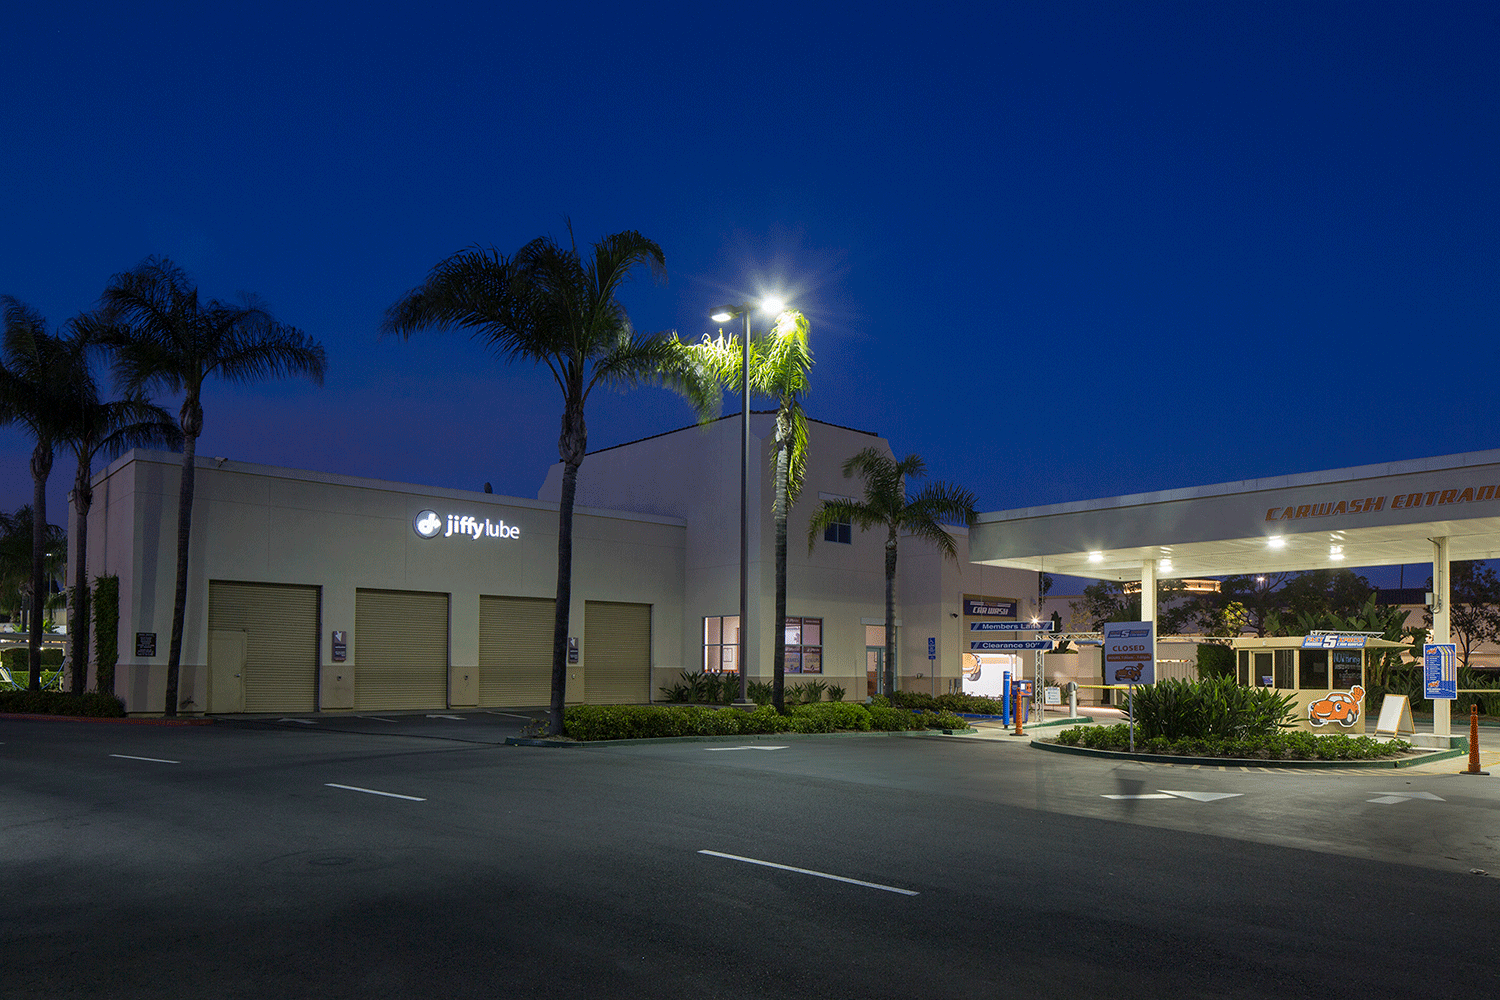  Night view of Jiffy Lube and Fast 5 Xpress Car Wash at Harvard Place Auto Plaza